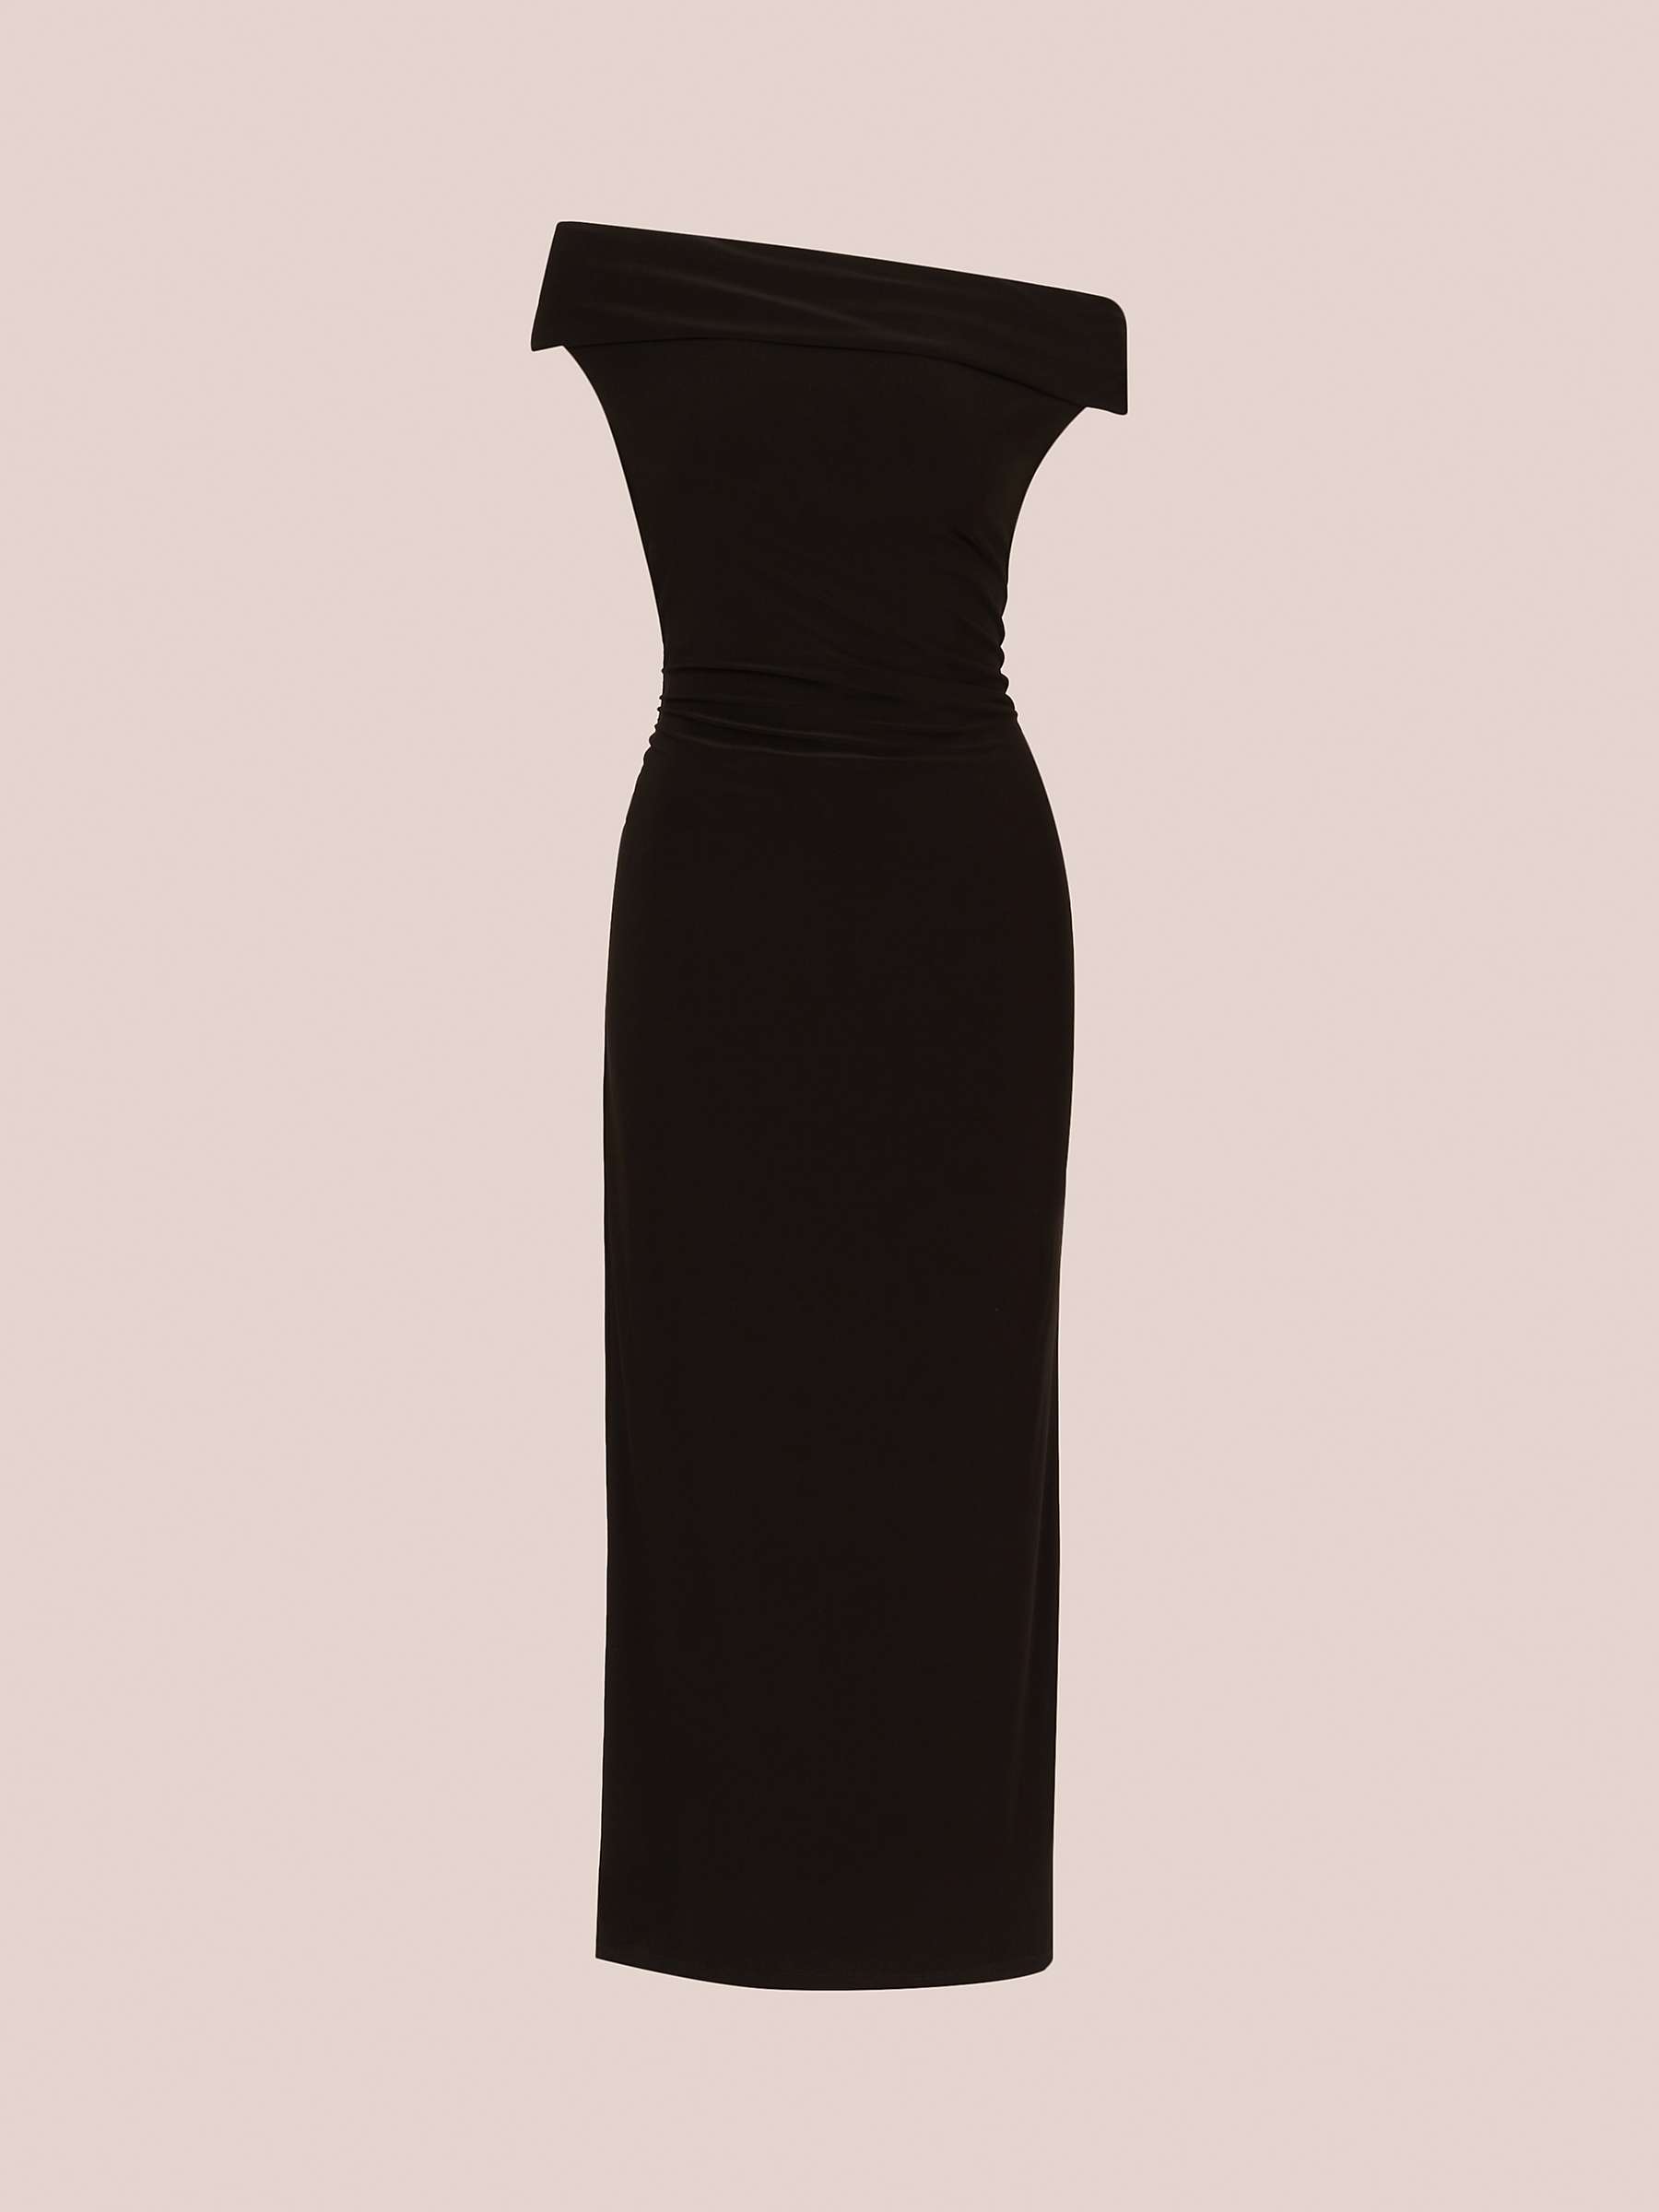 Buy Adrianna by Adrianna Papell Matte Jersey Maxi Dress, Black Online at johnlewis.com